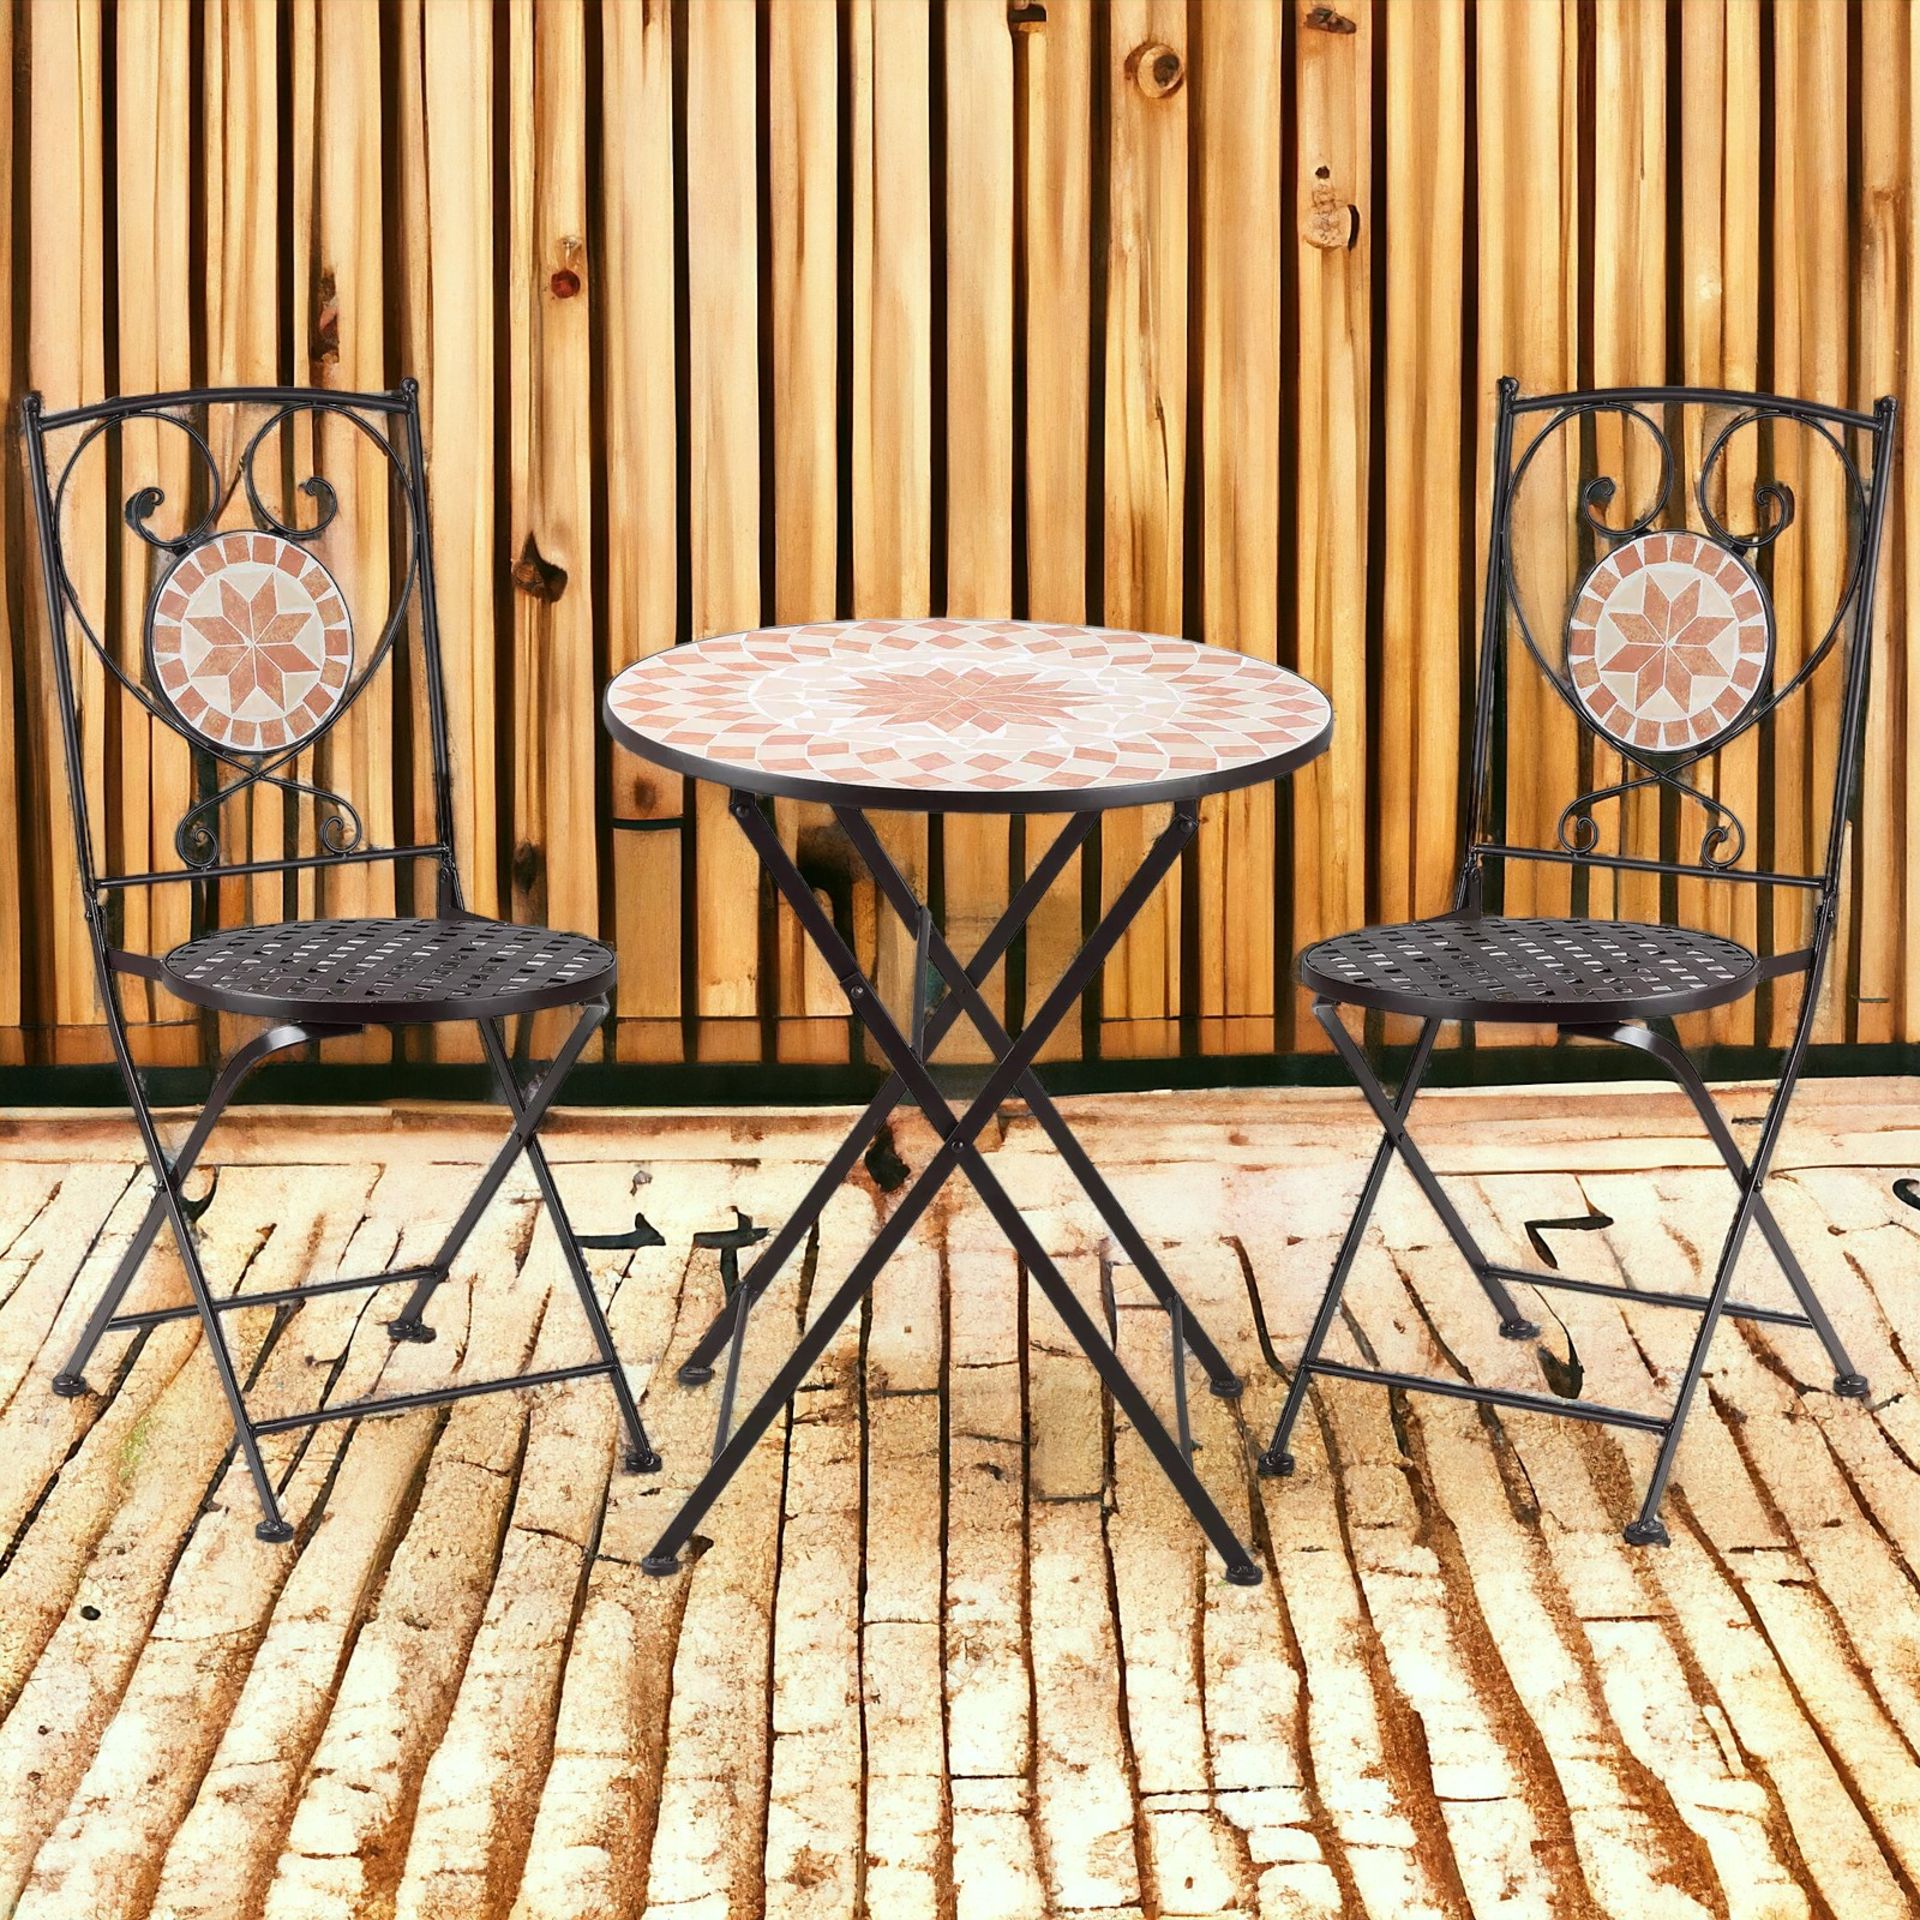 FREE DELIVERY- BRAND NEW 3-PIECE OUTDOOR BISTRO SET W/ MOSAIC ROUND TABLE AND 2 ARMLESS CHAIRS